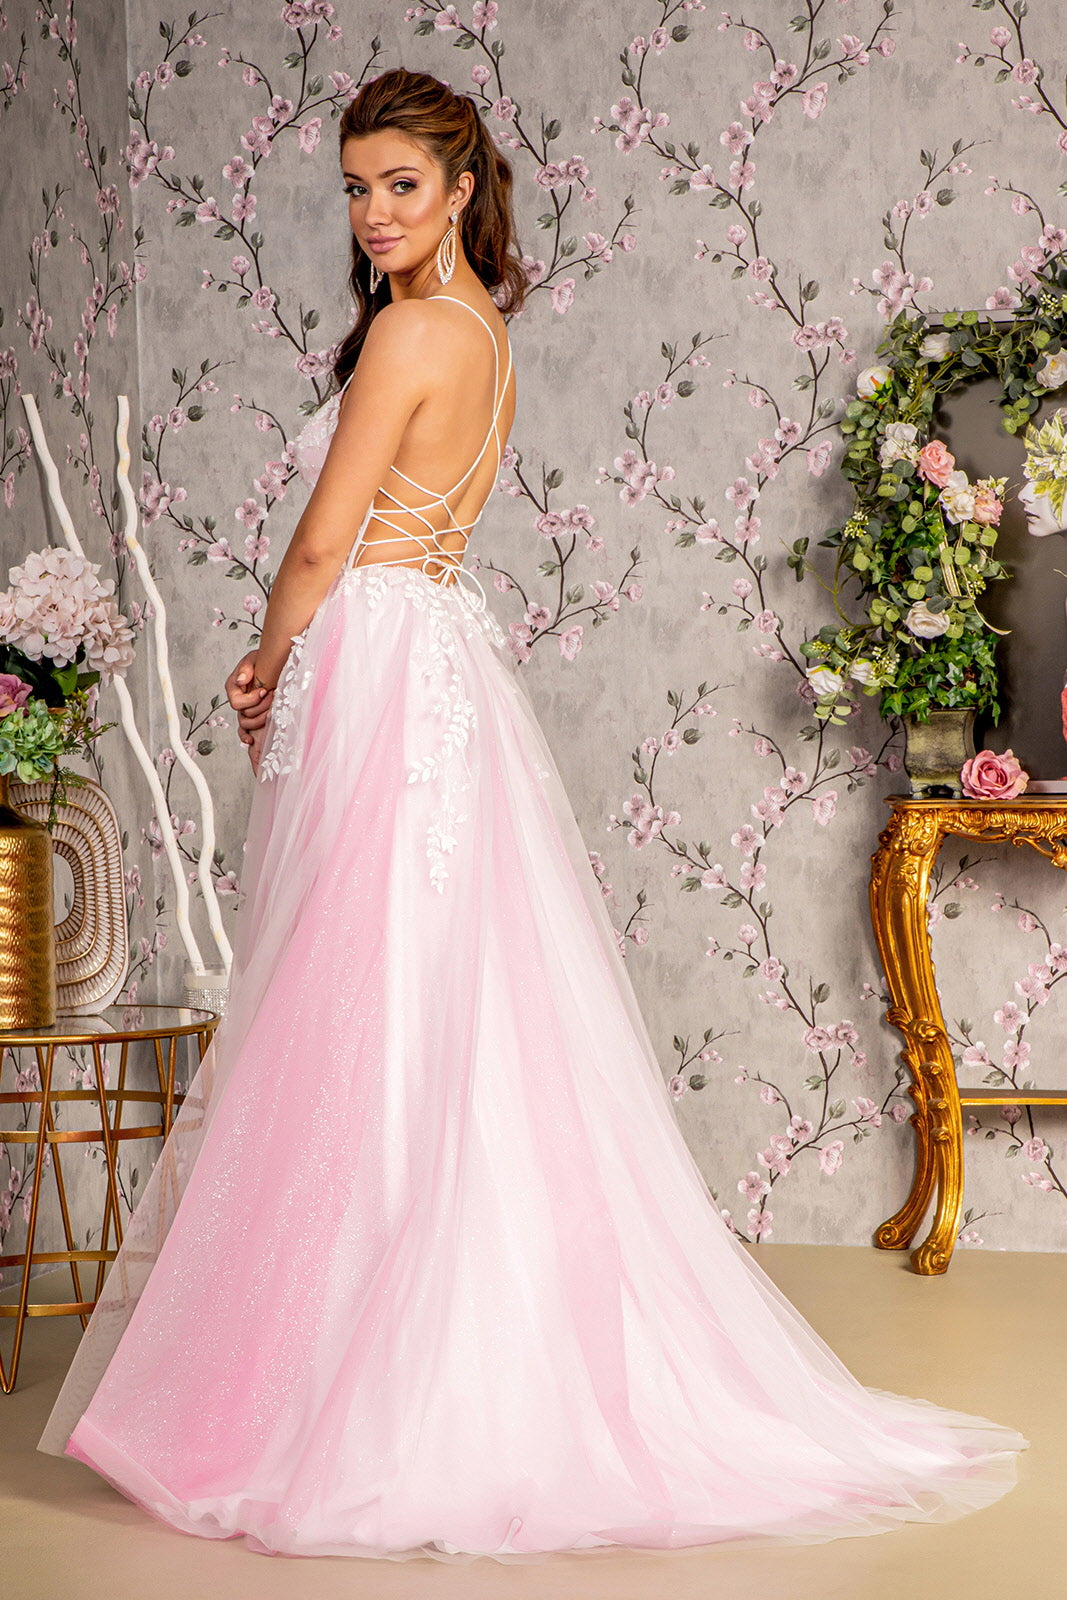 Applique Sleeveless A-line Slit Gown by GLS Gloria GL3249